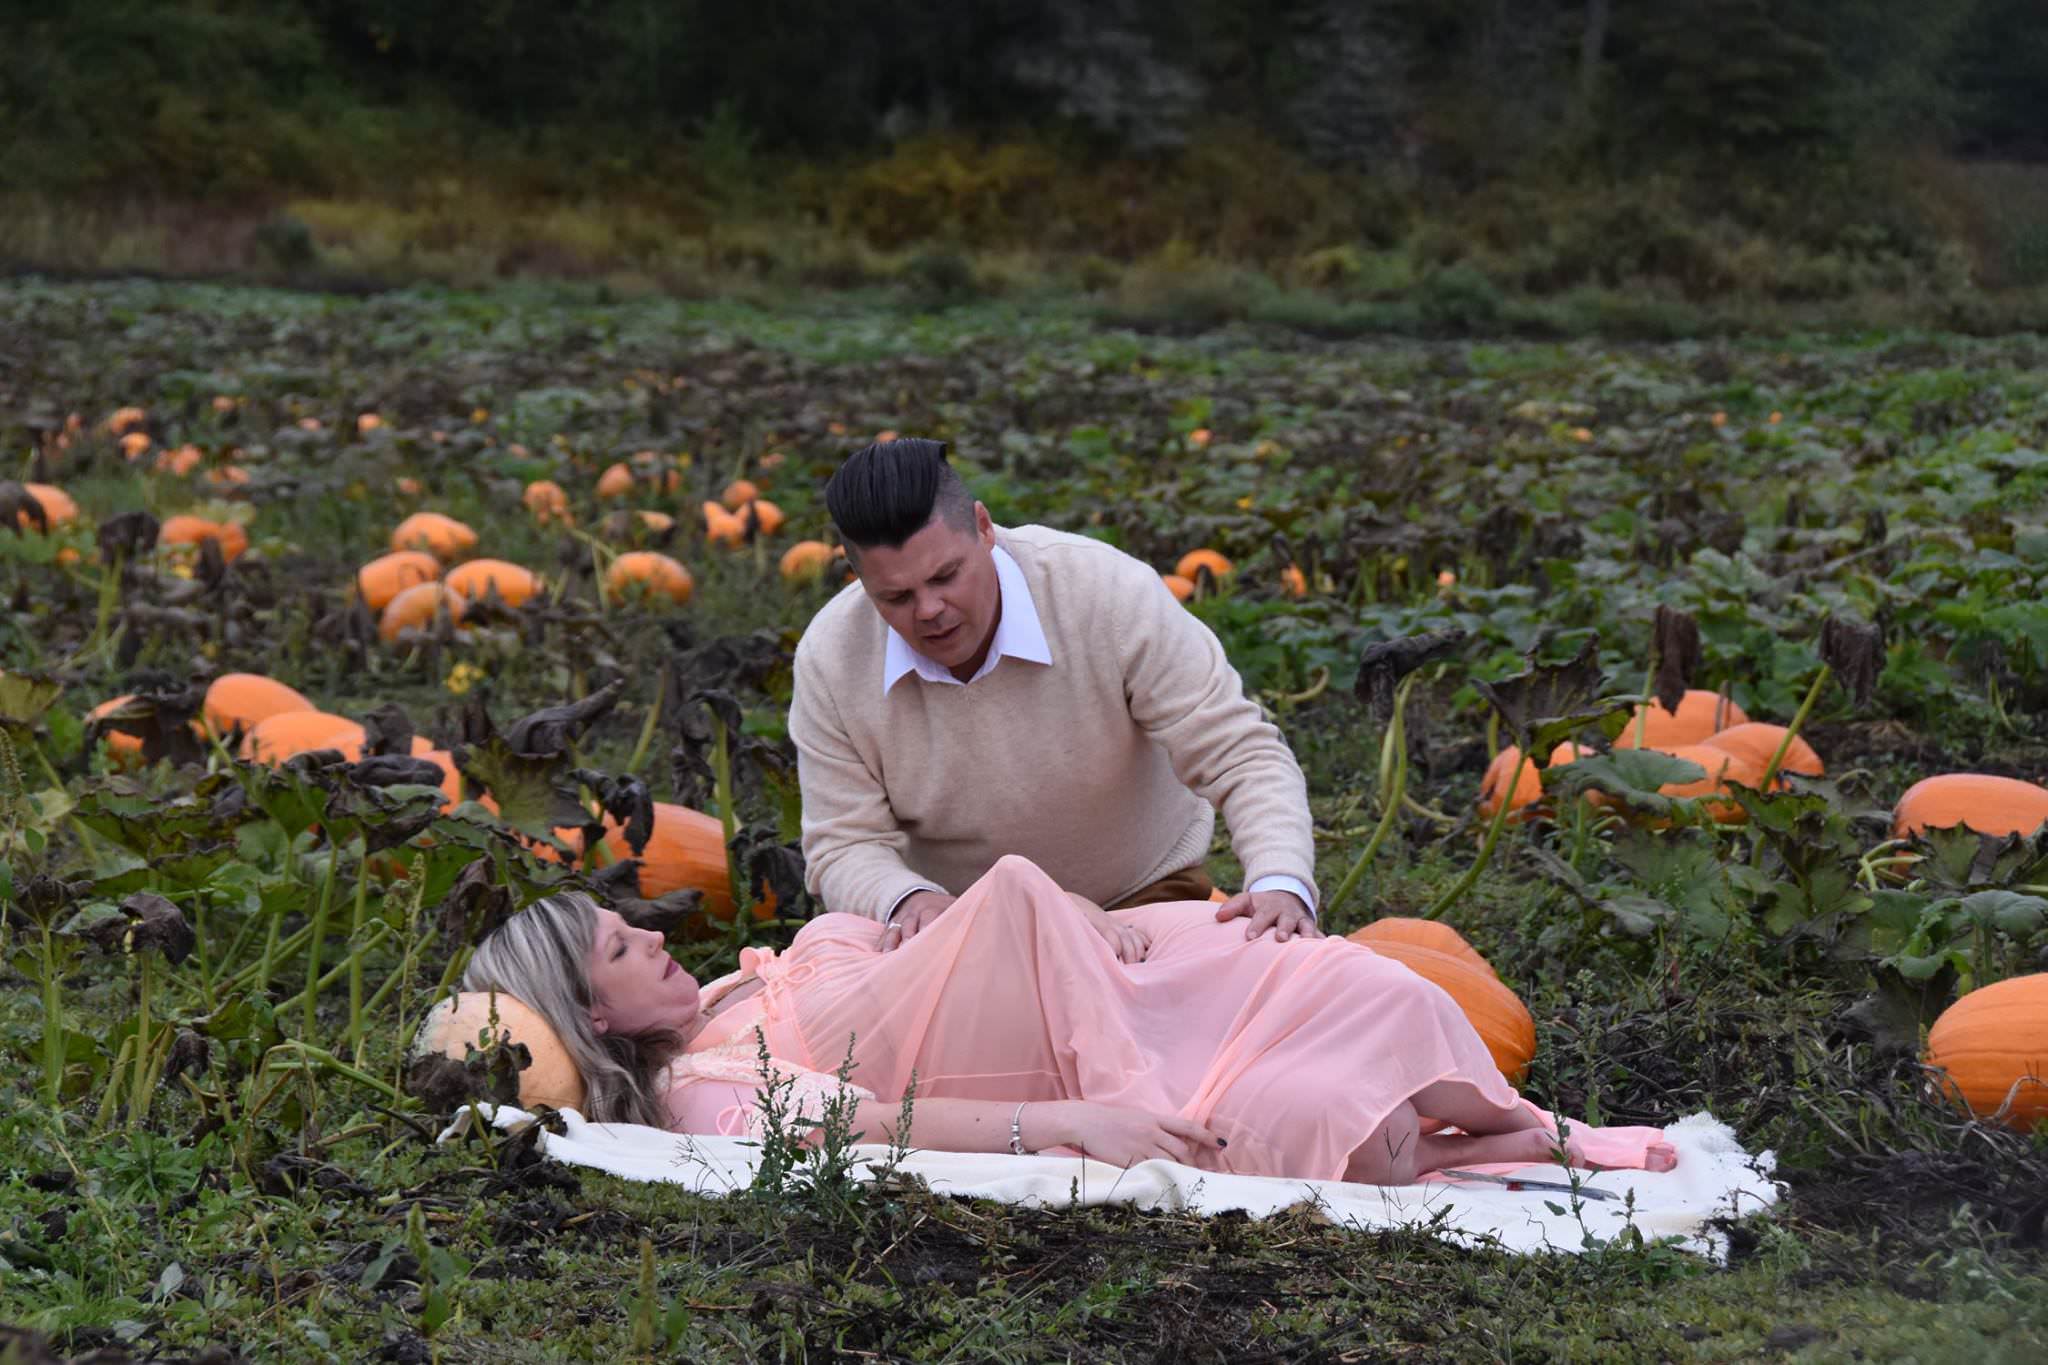 Creative Couple Do A Special Maternity Photoshoot In Pumpkin Field